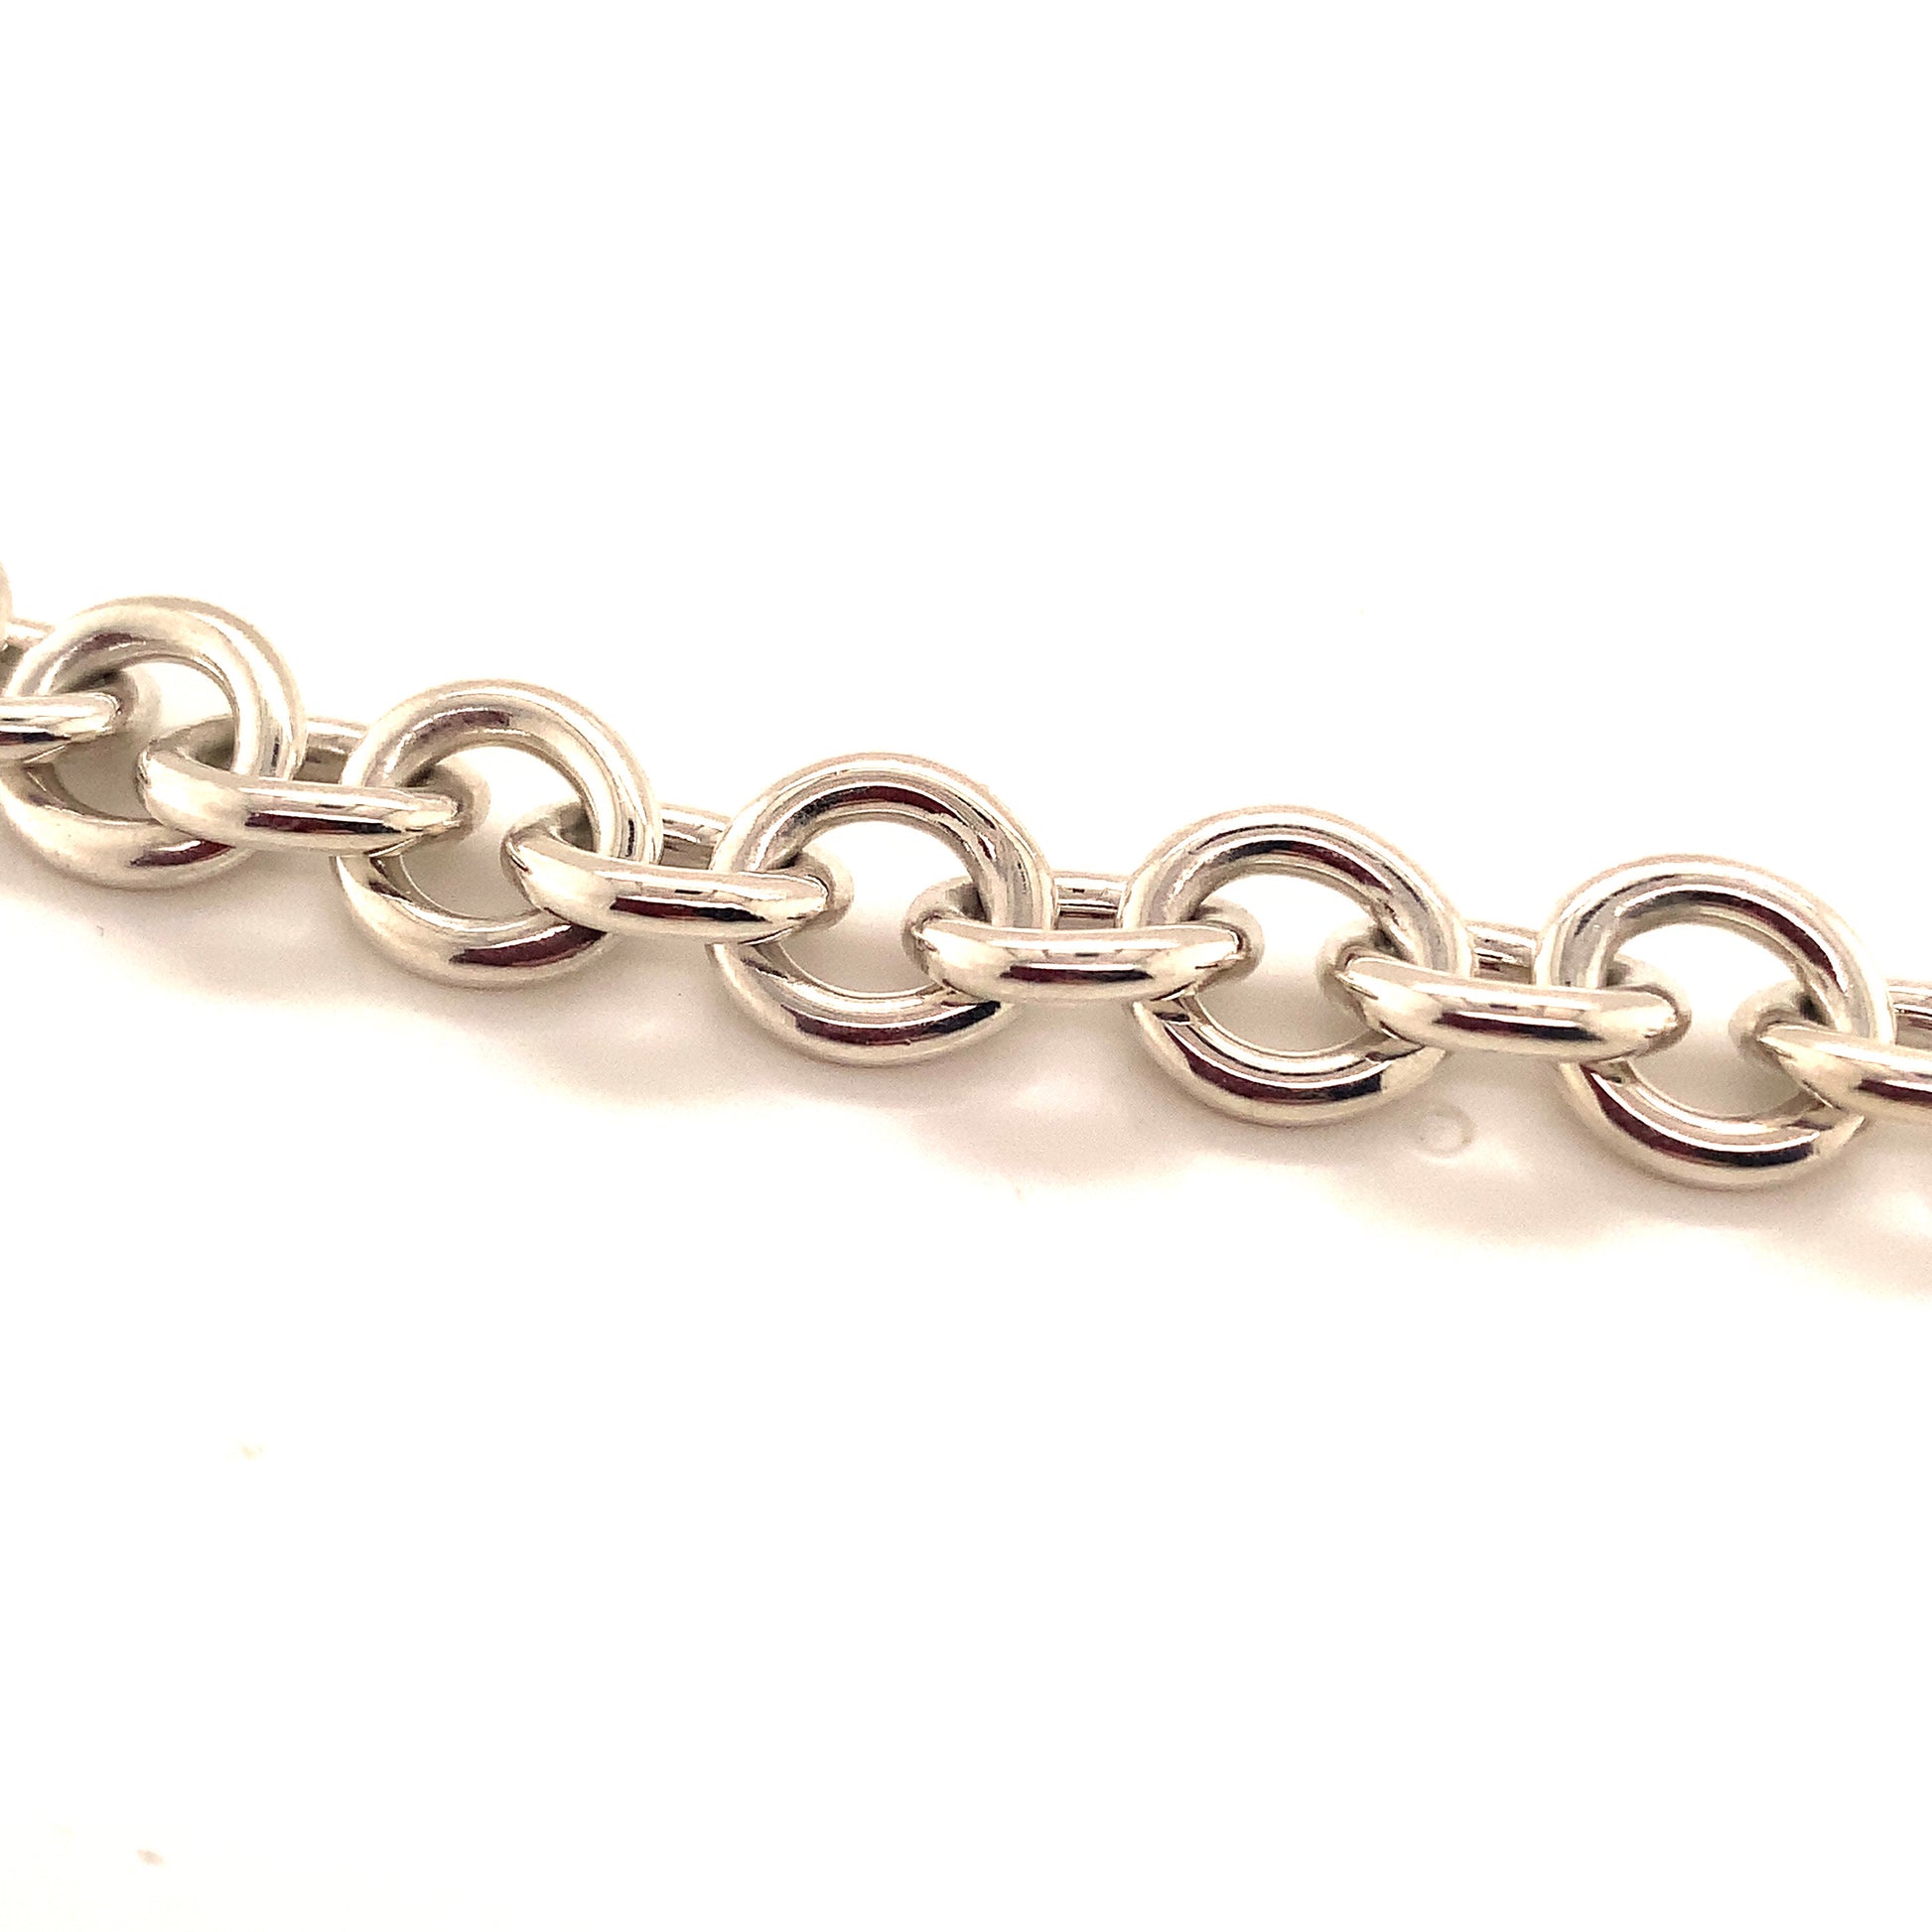 Tiffany & Co Estate Sterling Silver Bracelet 7 Inches 34.2 Grams TIF102 - Certified Estate Jewelry